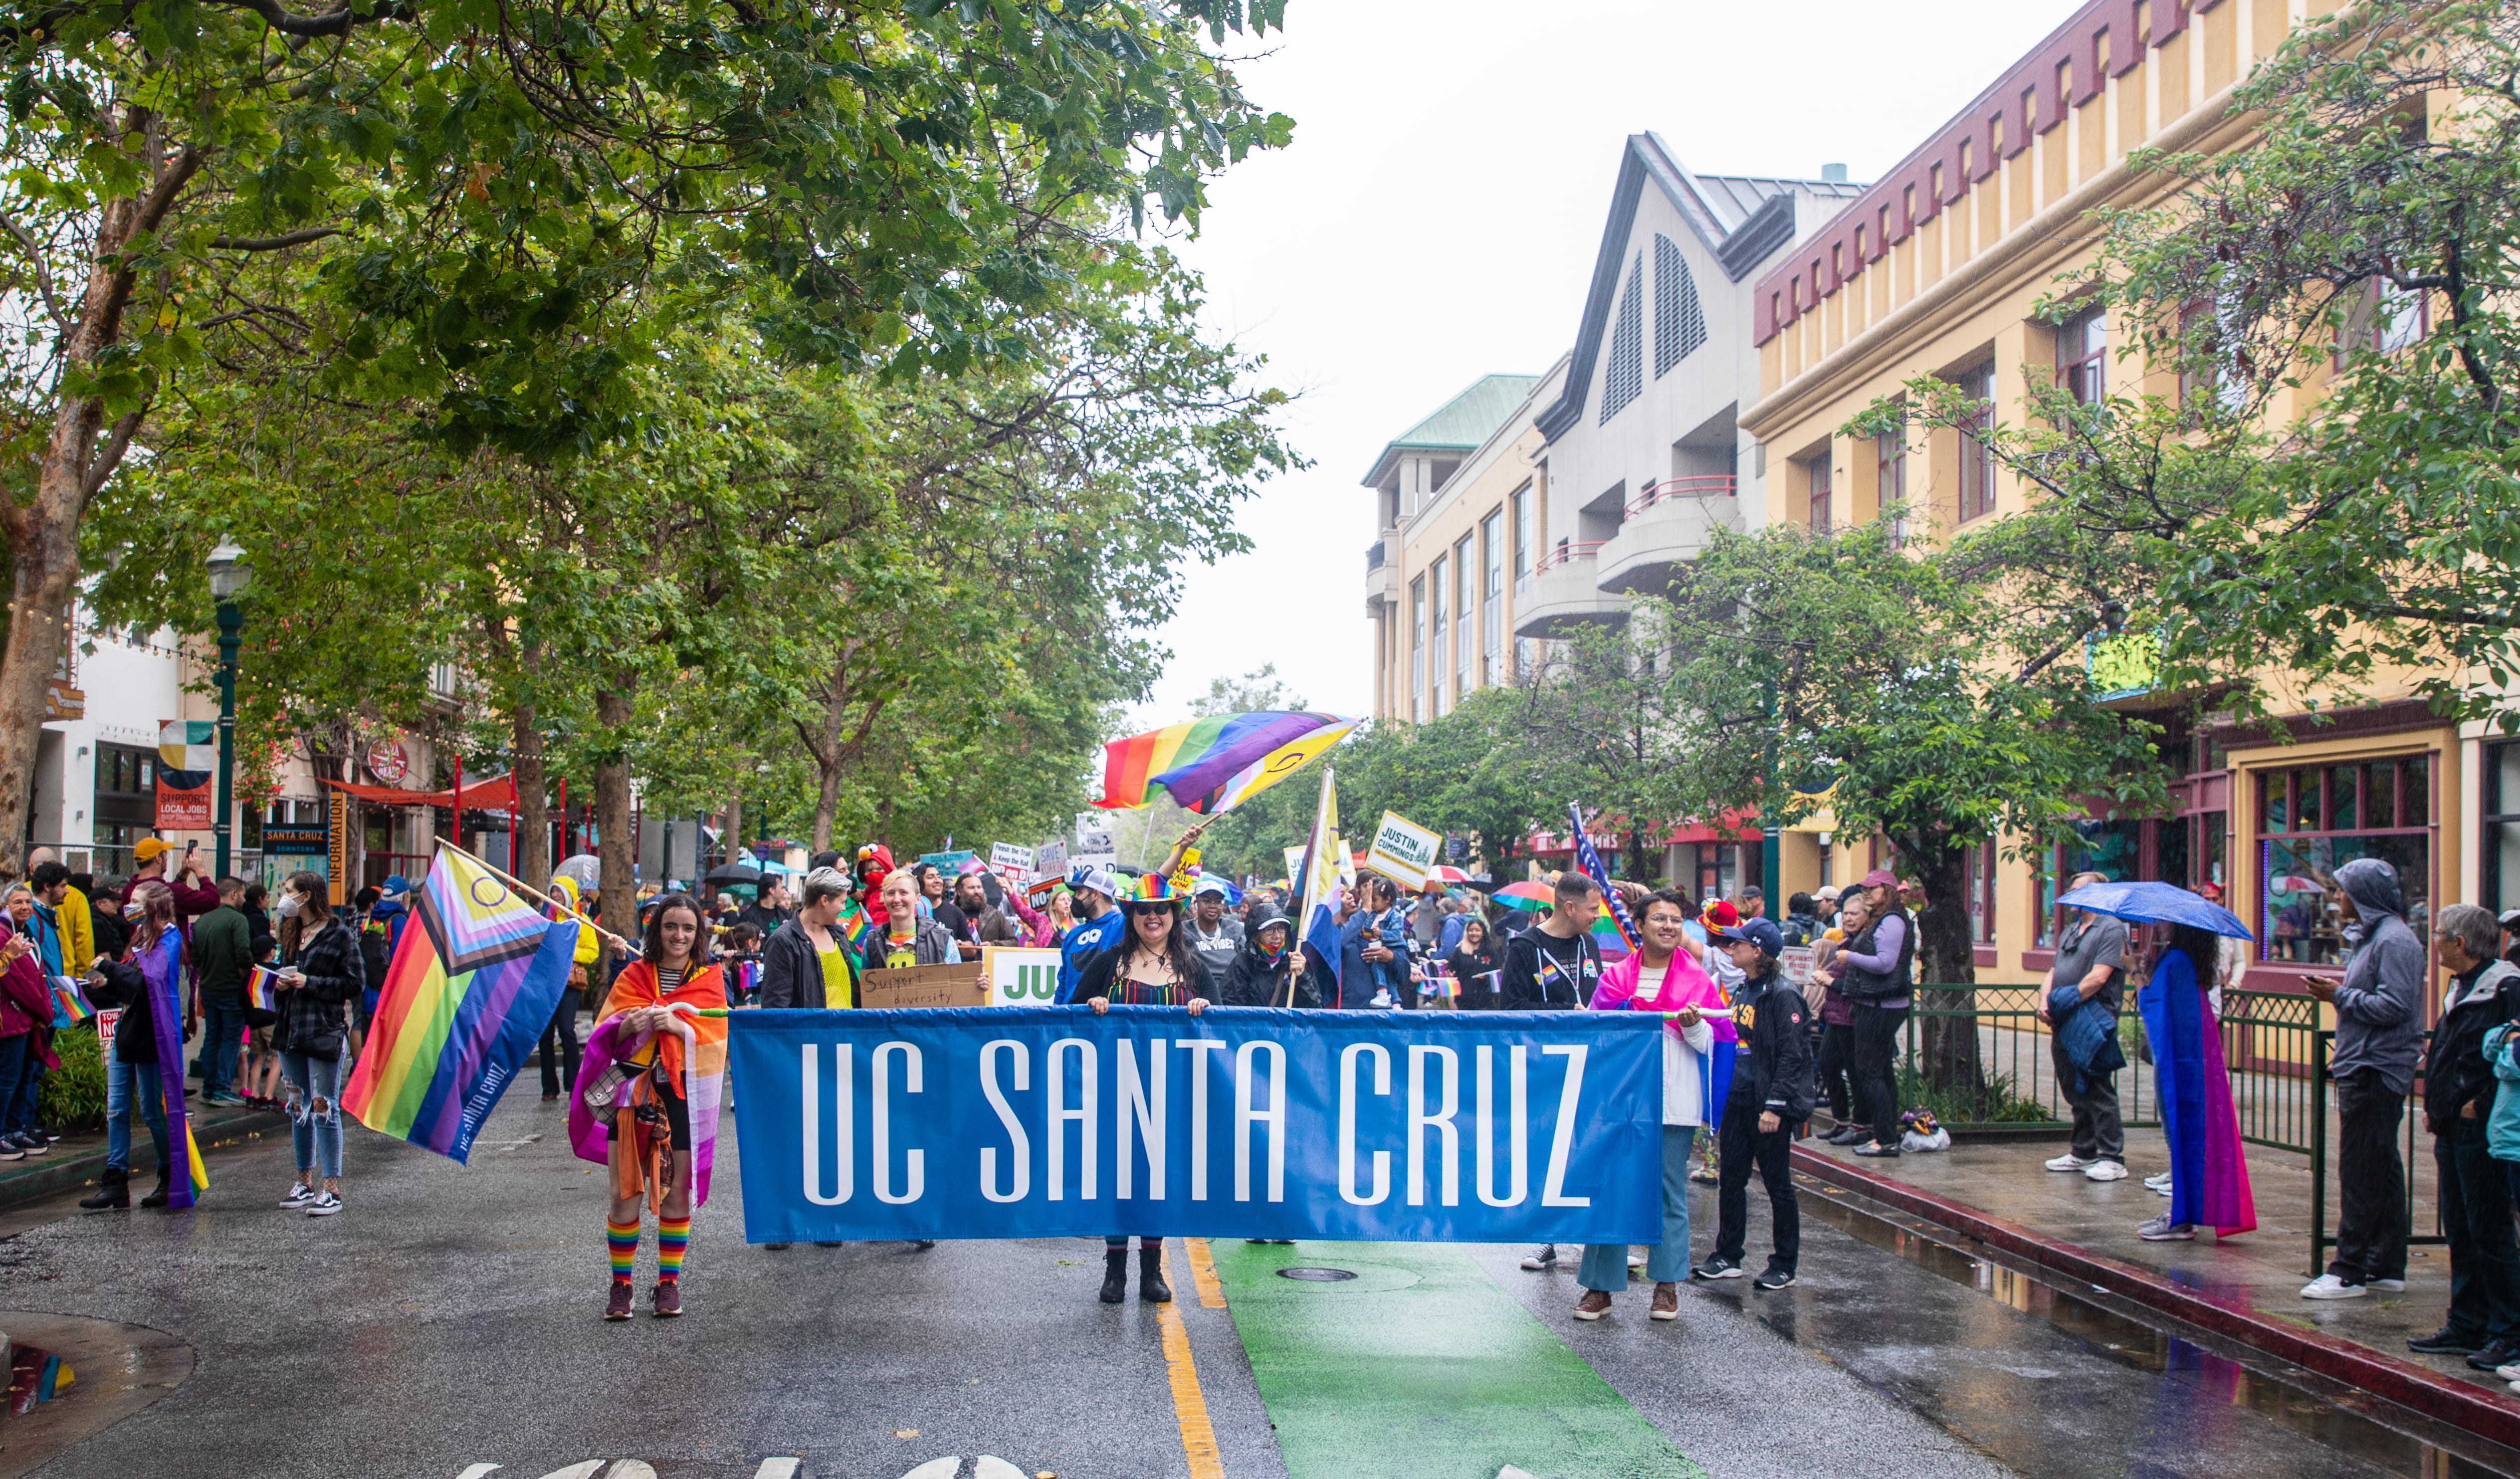 parade with people holding banner that says UC Santa Cruz